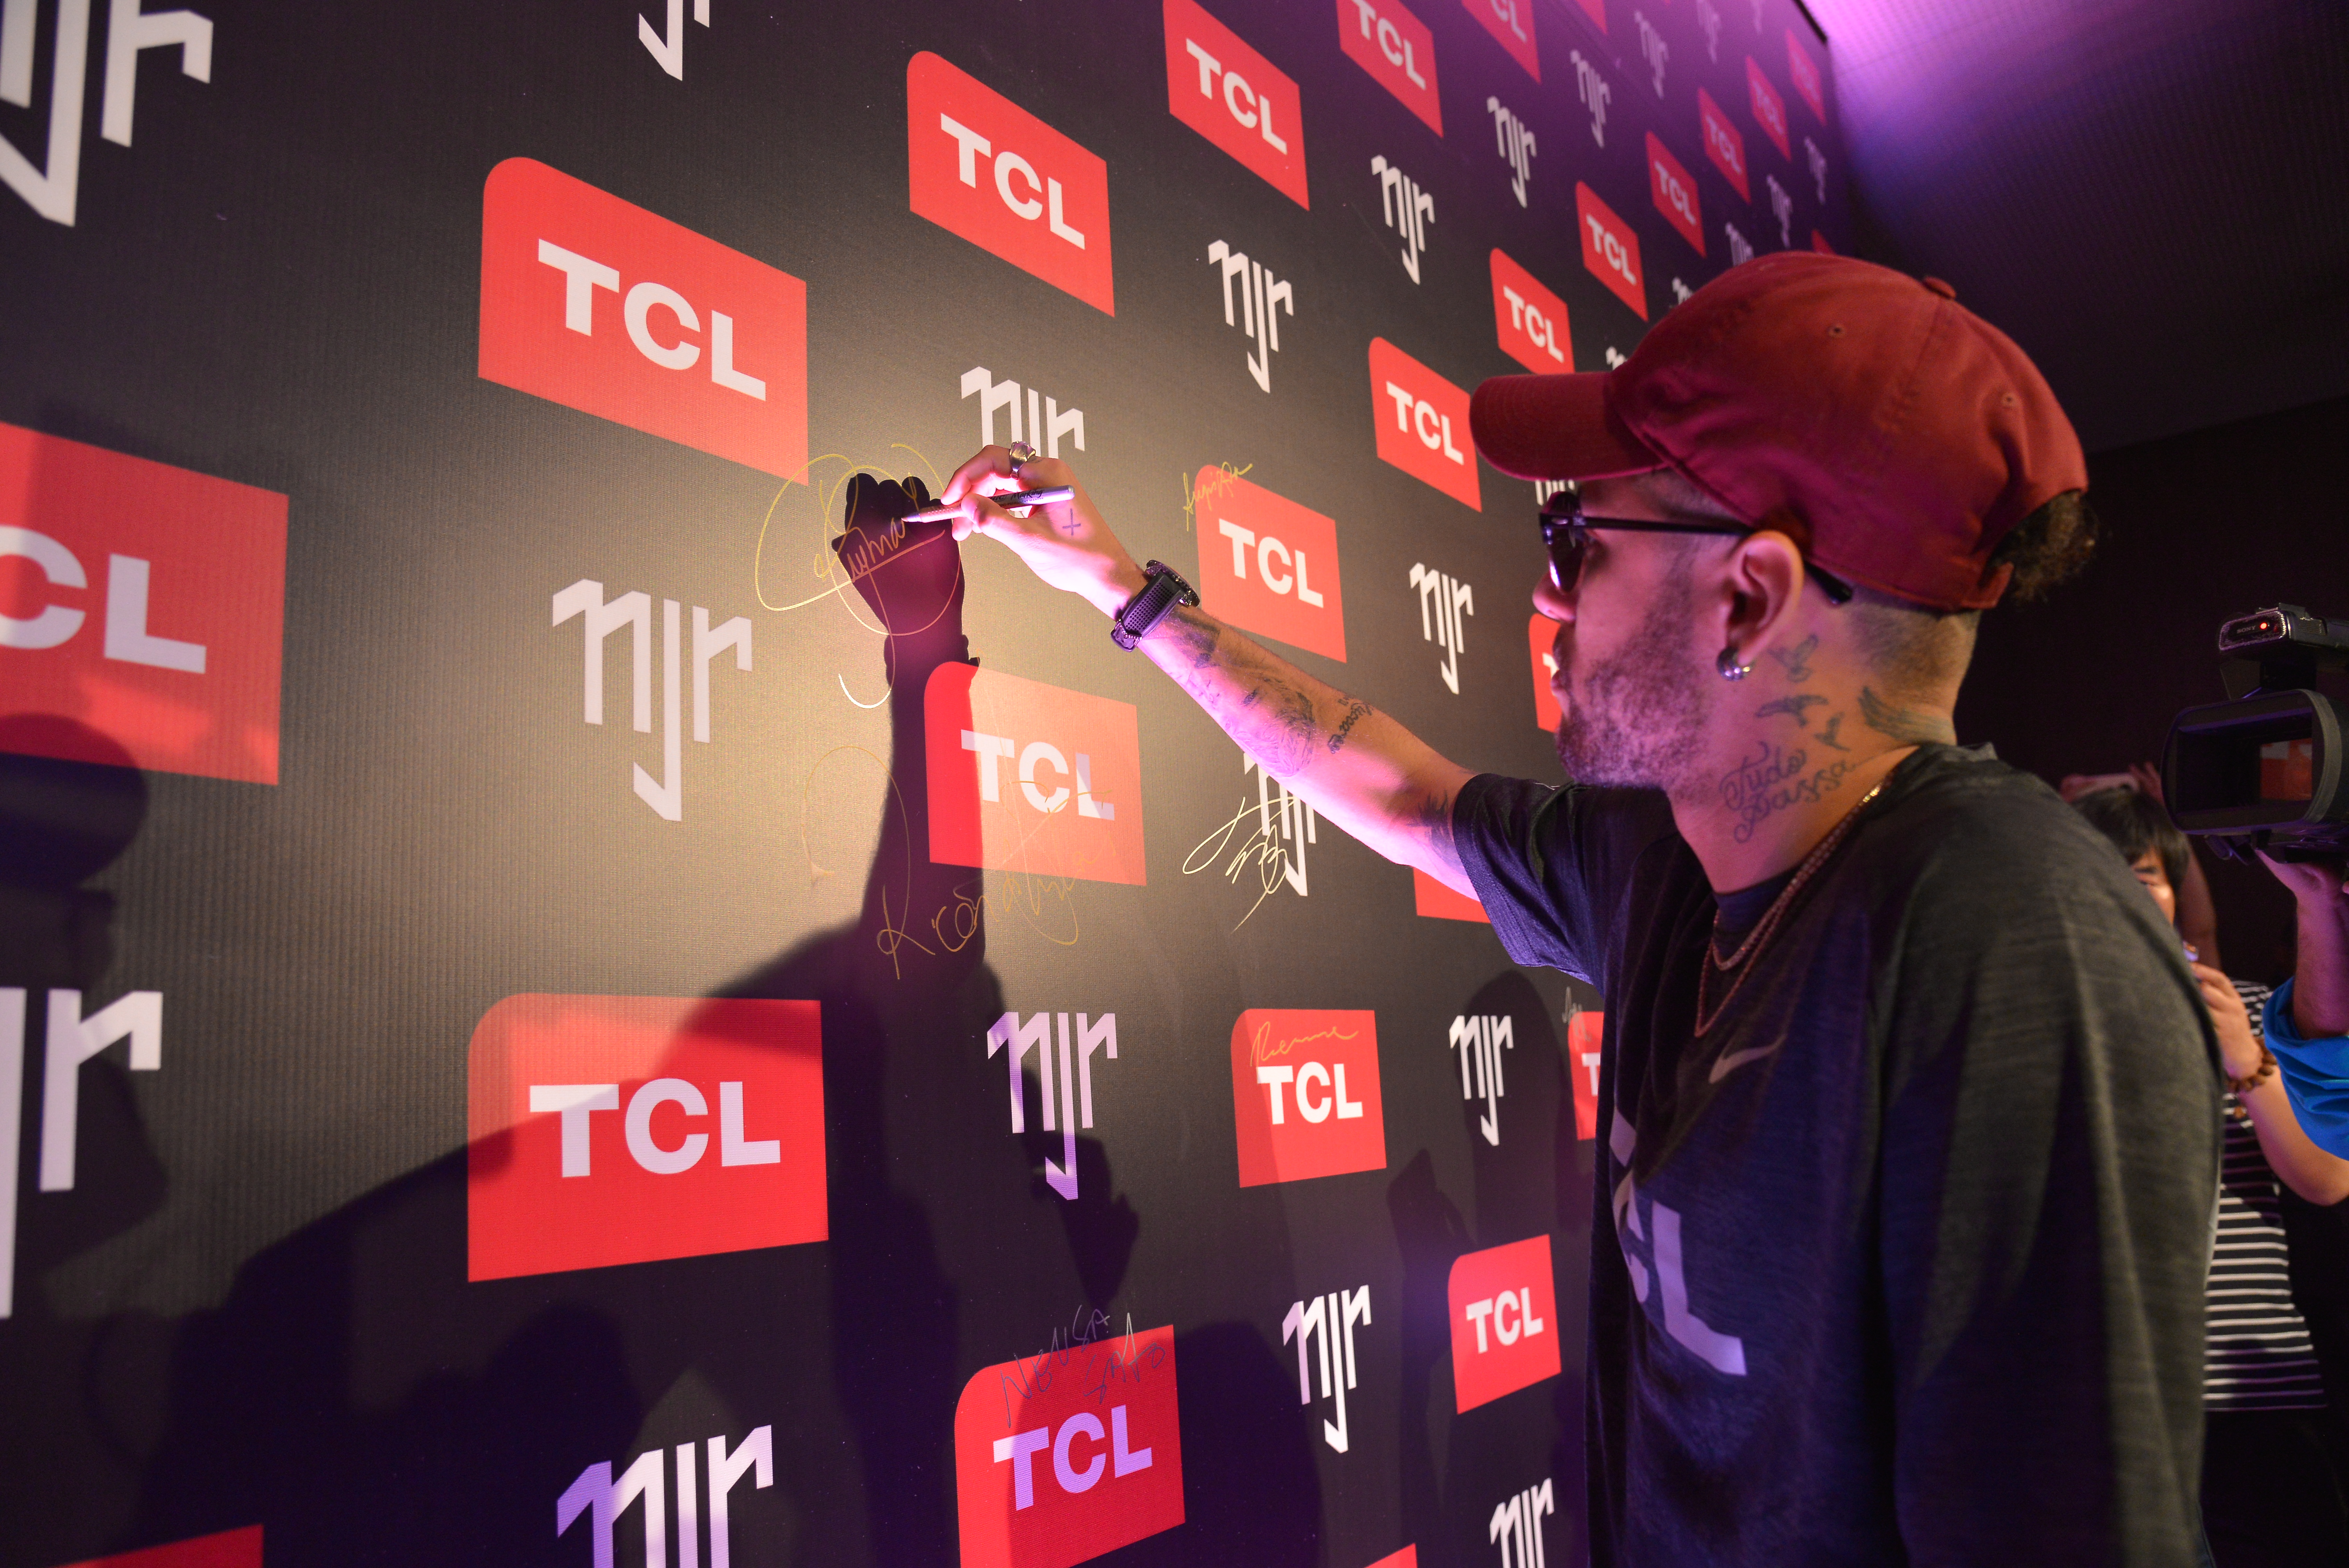 TCL on X: Football legend, Neymar Junior has been appointed as the TCL  Global Brand Ambassador, striving to reach standards of excellence together  with TCL. #TCL #TCLTV #TCLMultimedia #BornALegend   / X